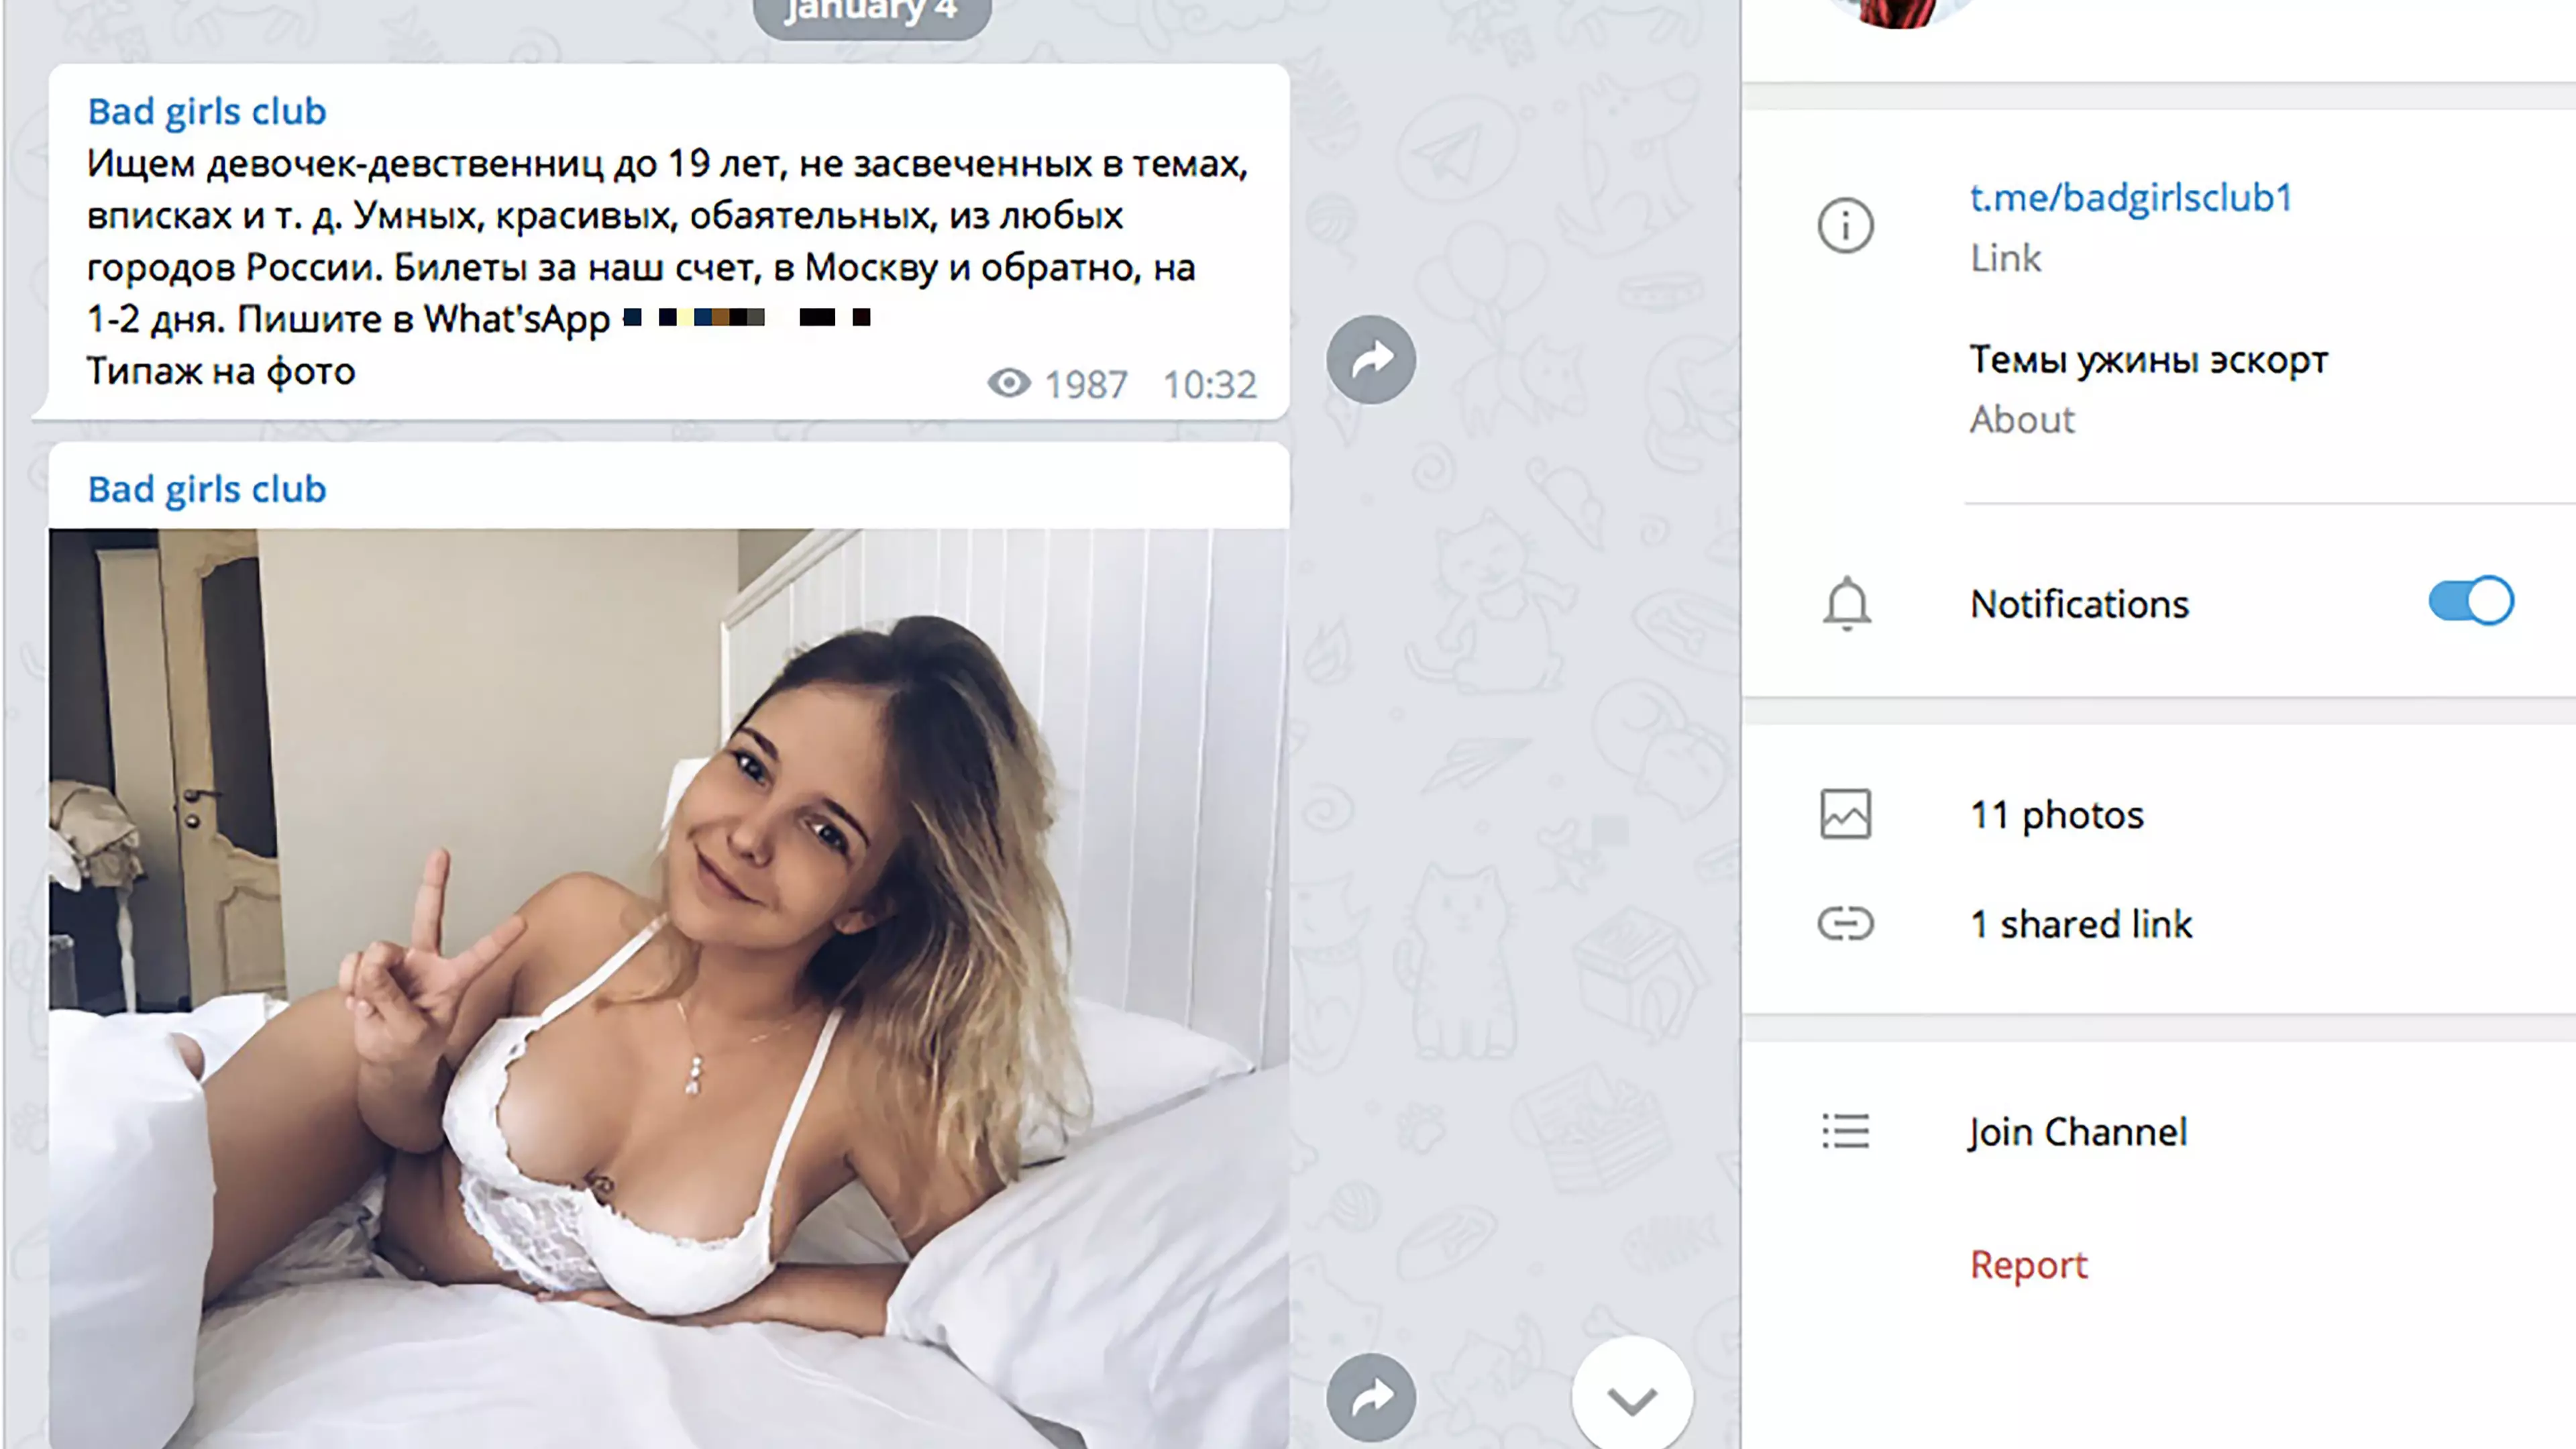 Russian 'Virginity Dealers' Exposed In New Report